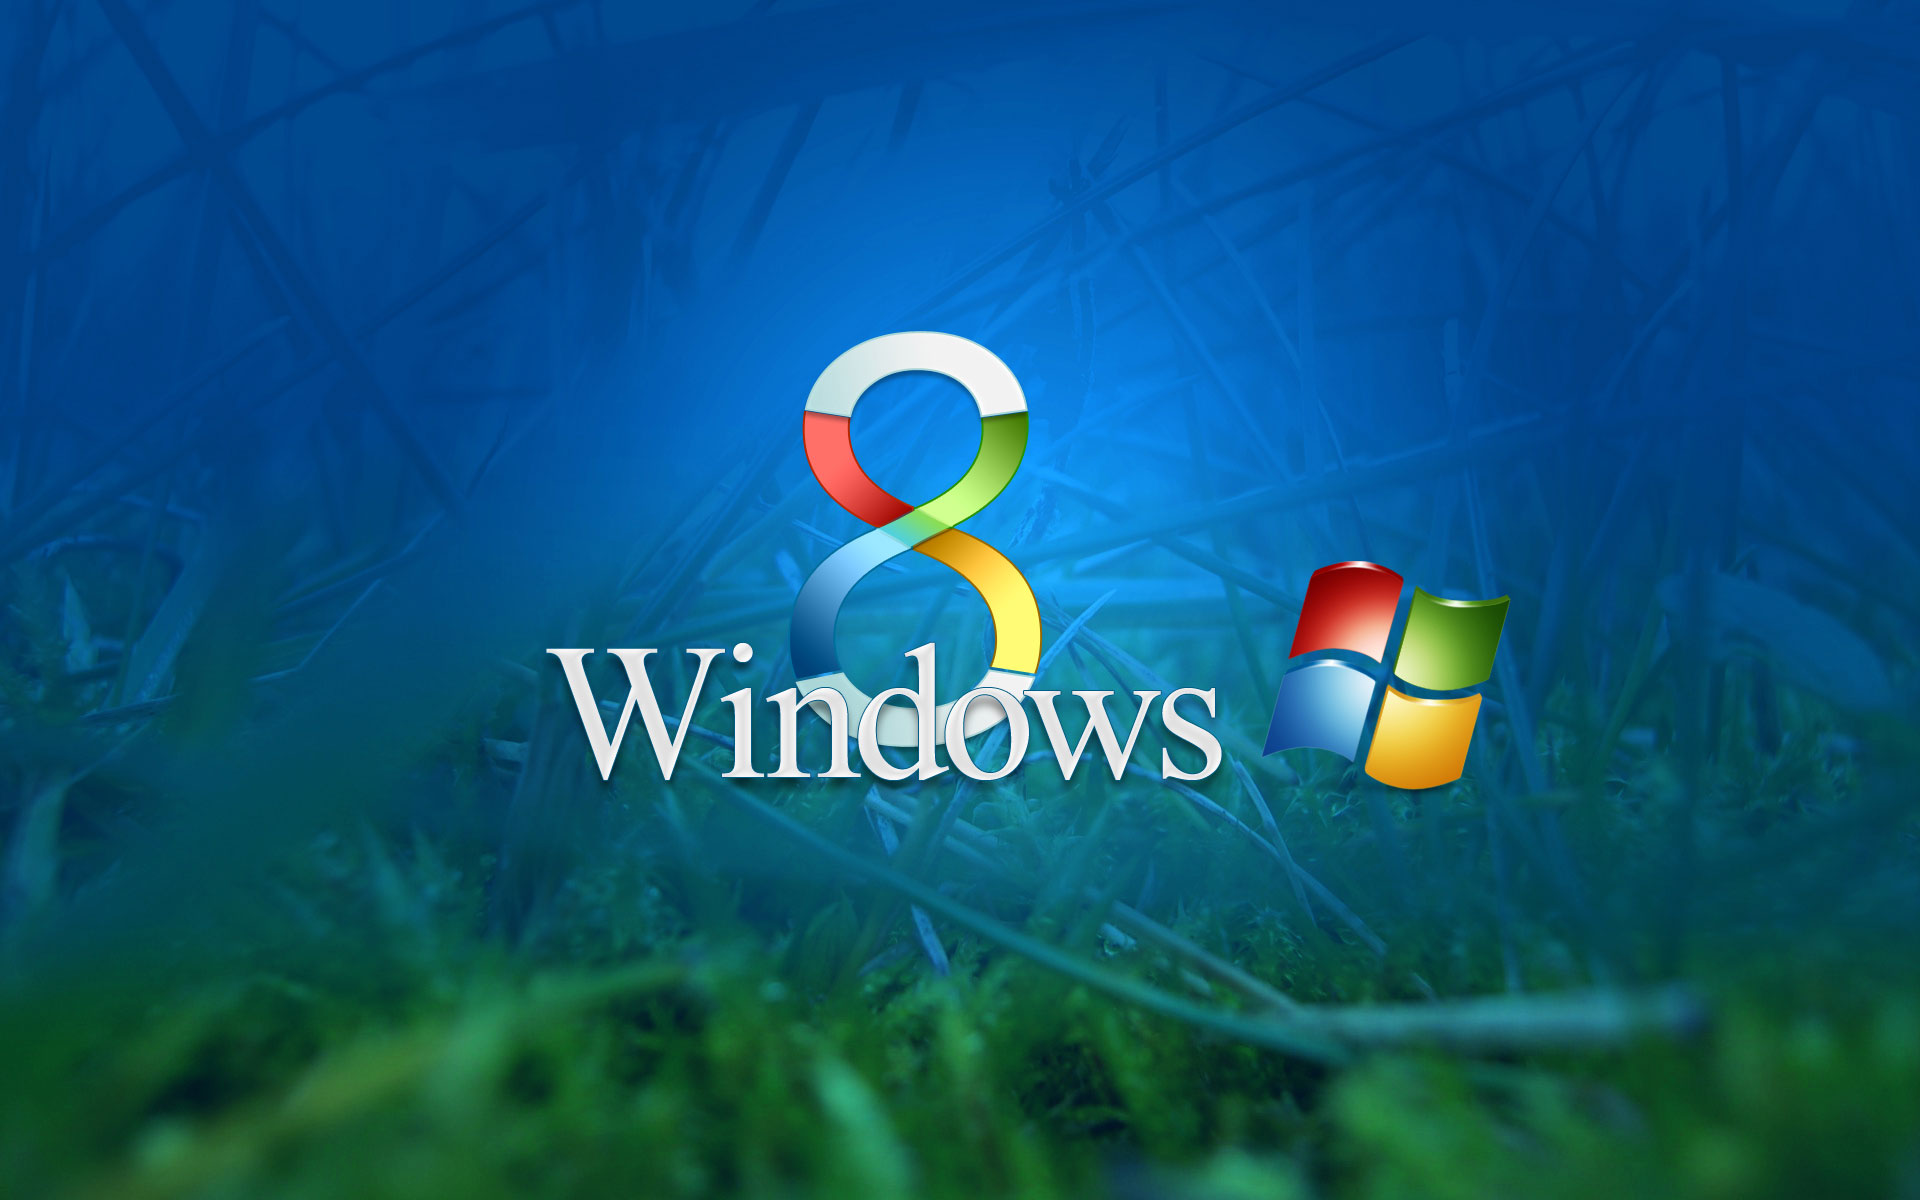 Download Windows 8 Wallpaper High Quality gzqr3dtss - Download